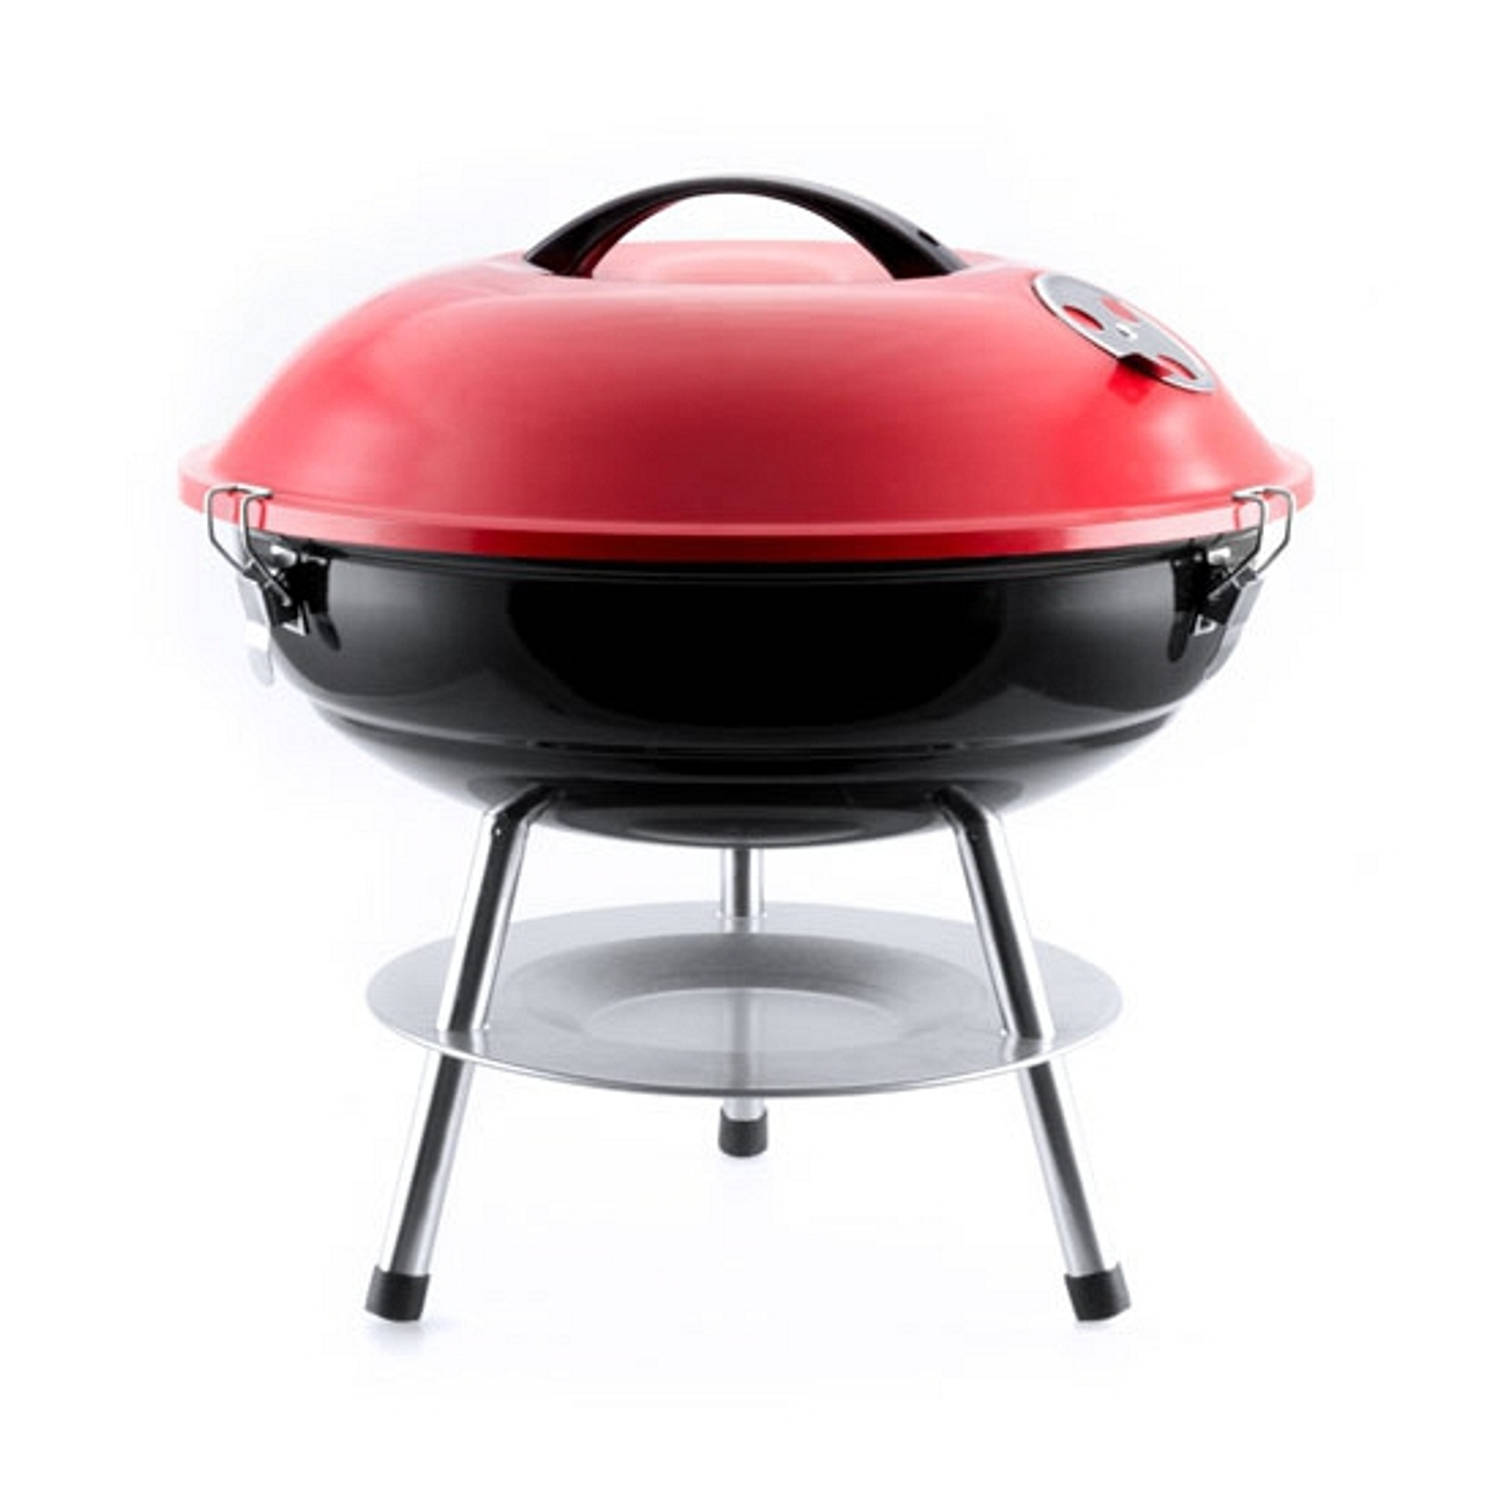 Ronde Houtskool Barbecue - 36 Cm - Rode Bbq - Rood